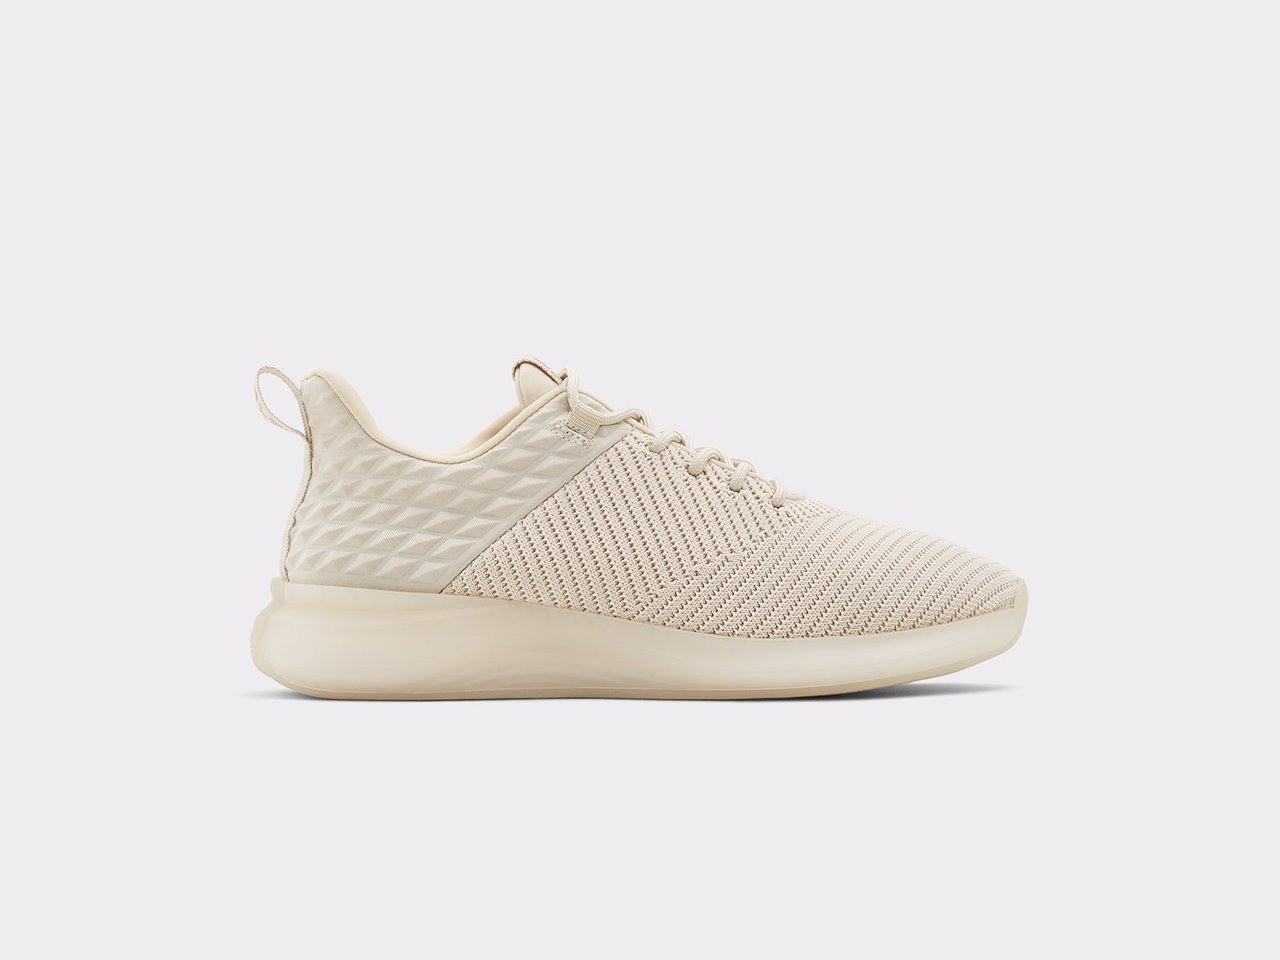 A pair of cream sneakers from Aldo made with sustainable algae-based foam against a light grey background.